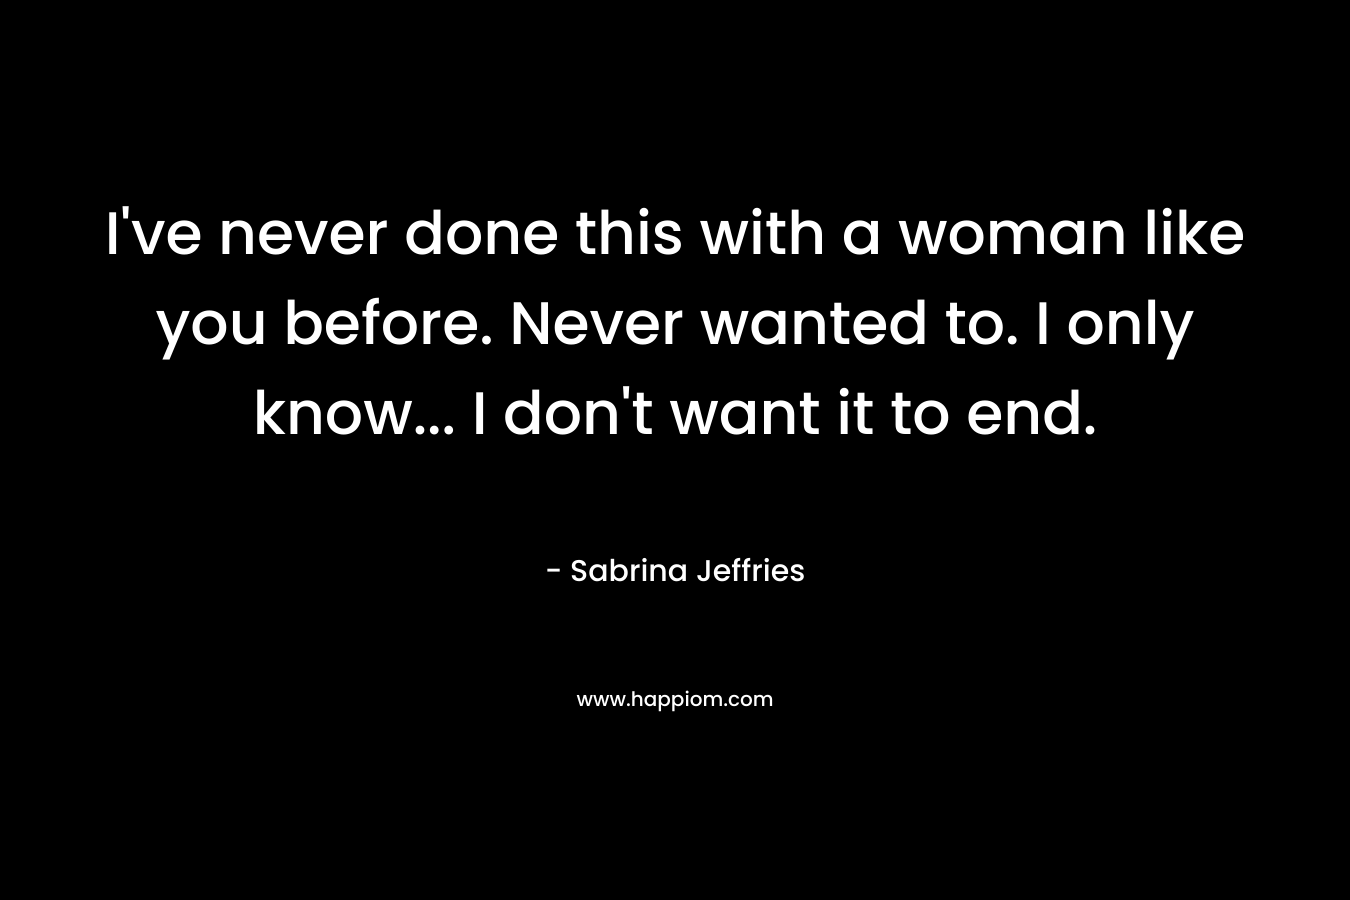 I’ve never done this with a woman like you before. Never wanted to. I only know… I don’t want it to end. – Sabrina Jeffries